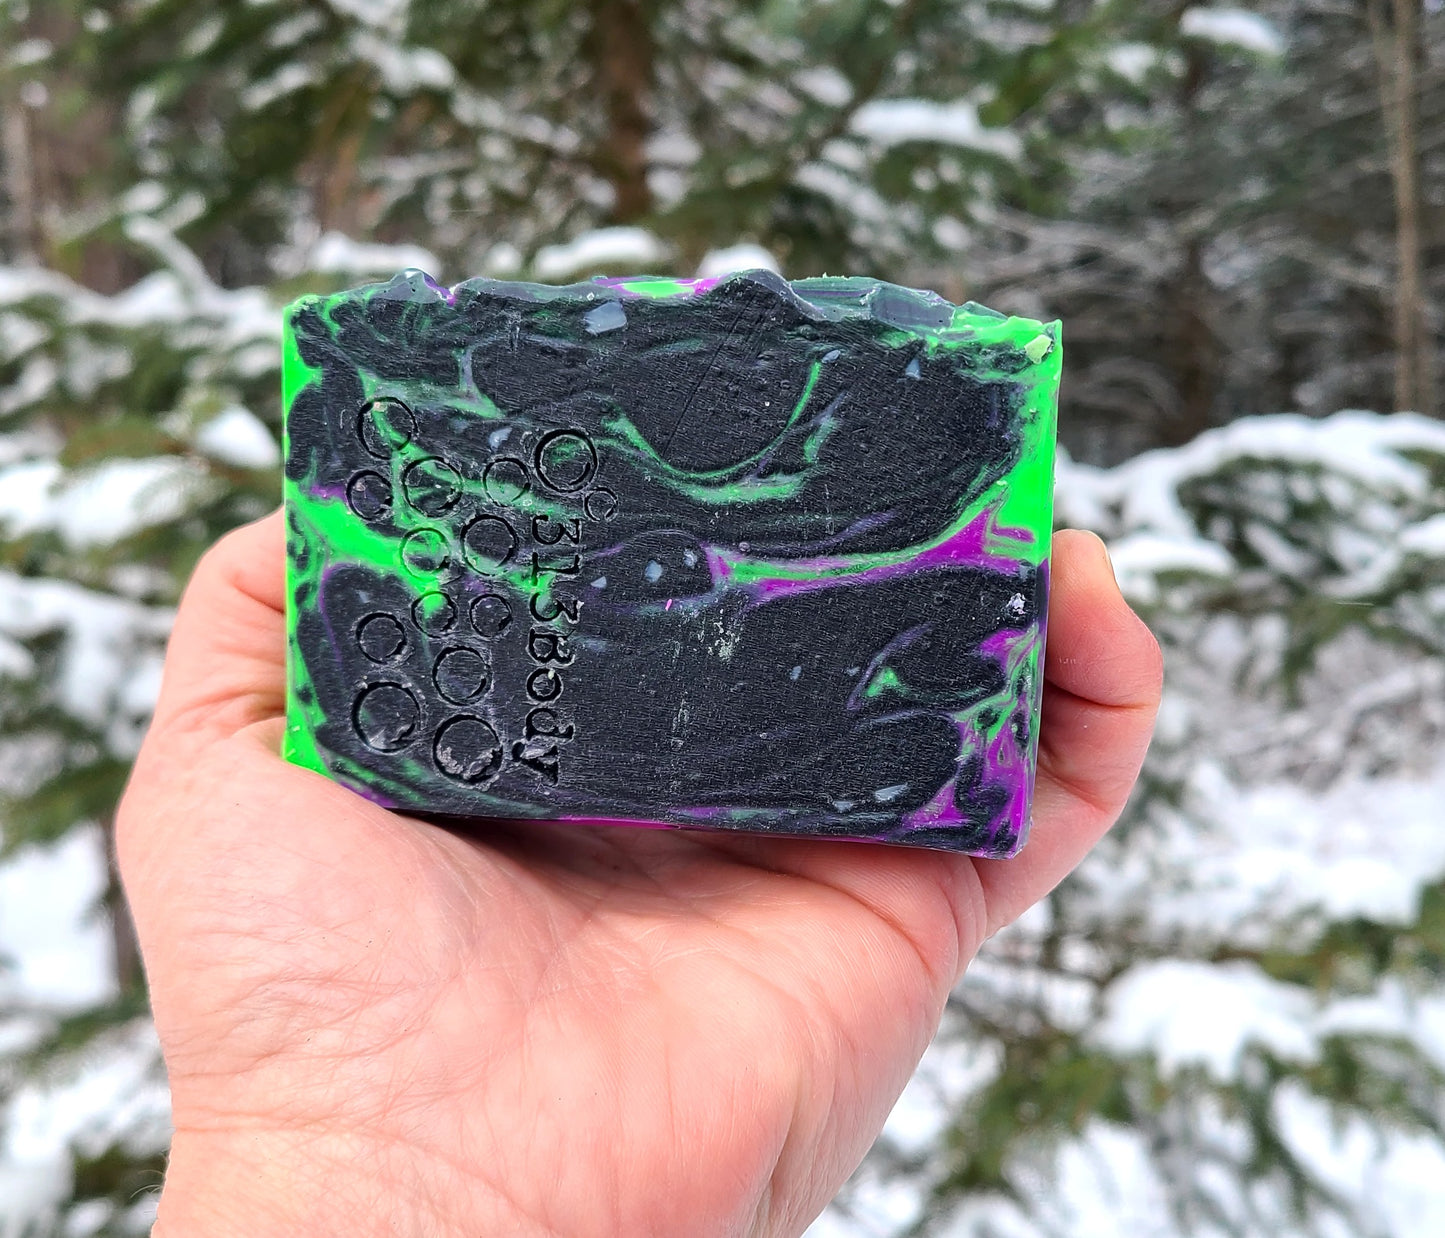 Northern Lights ~ Black Sea Scented Handmade Soap with Shea Butter and Activated Charcoal